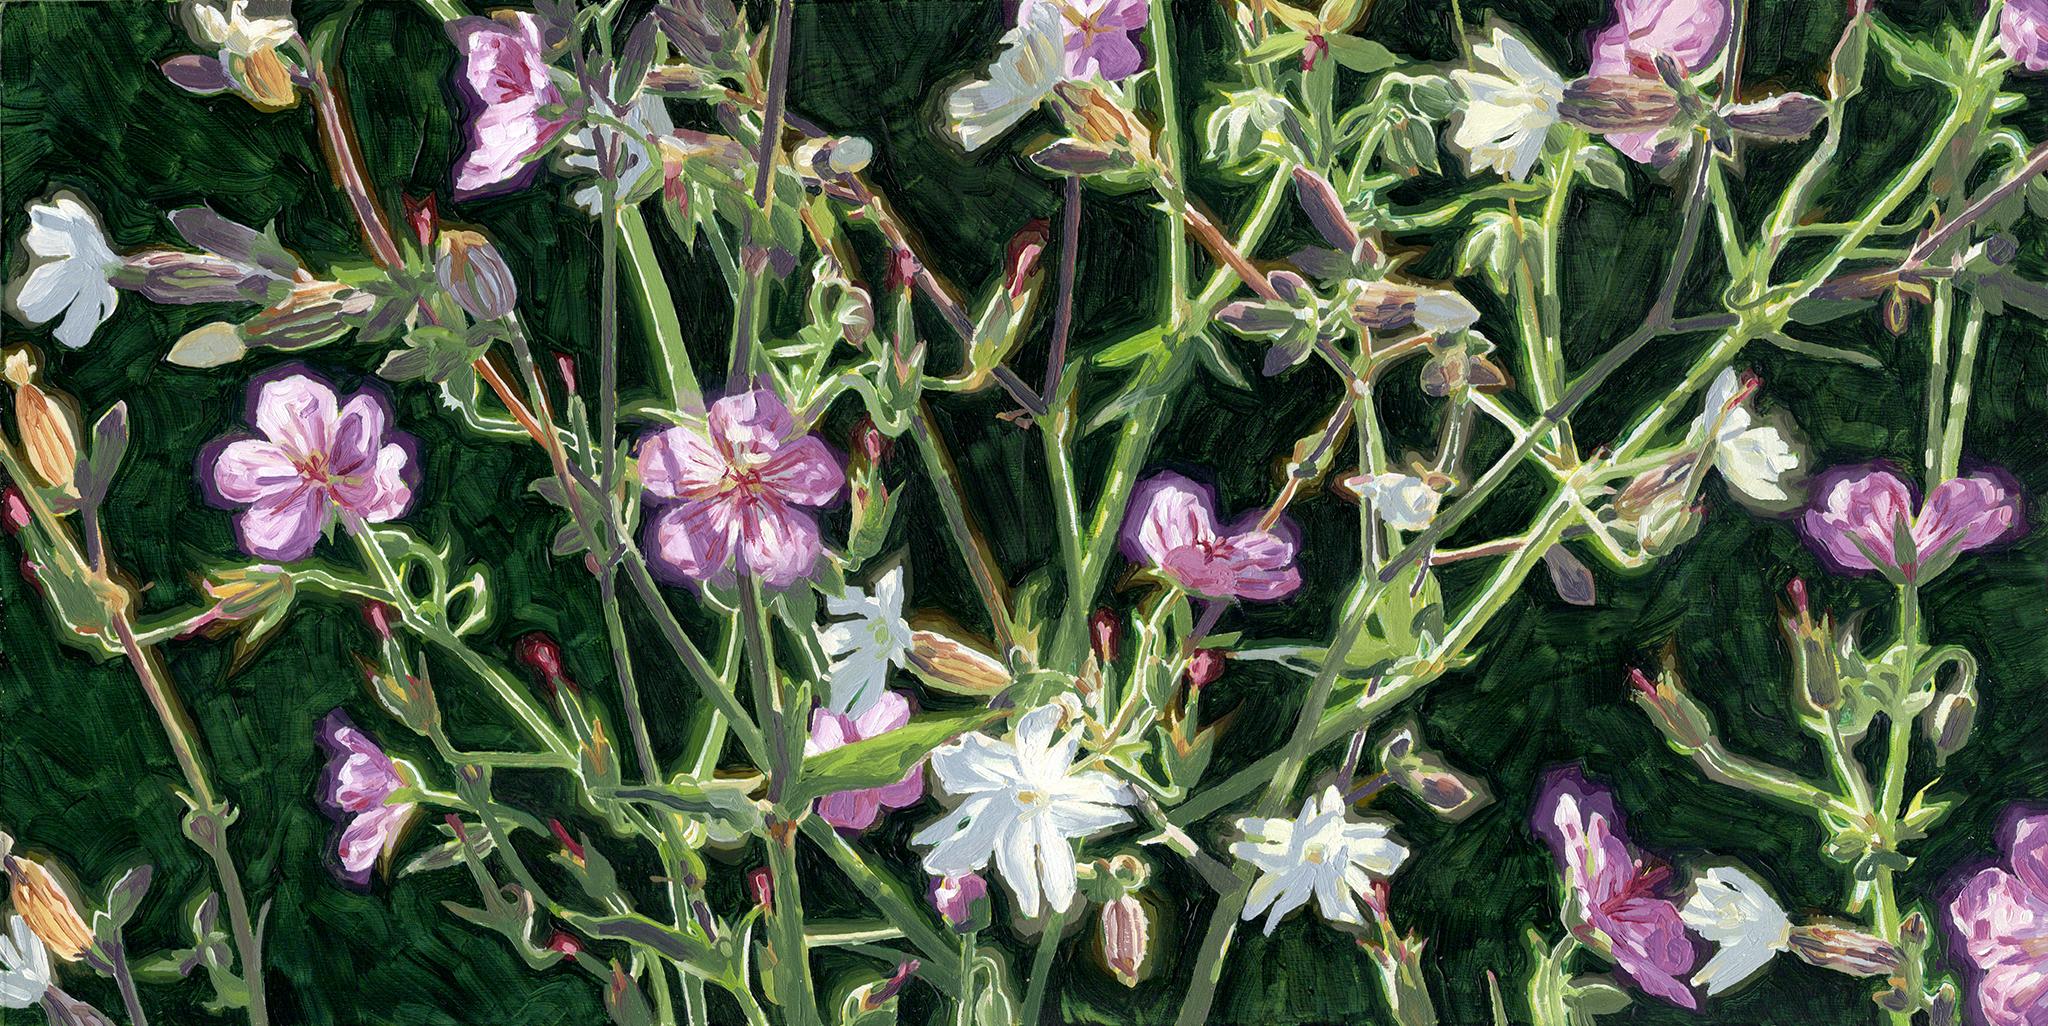 Canadian Contemporary Art by Christian Frederiksen - Entangled Wildflowers